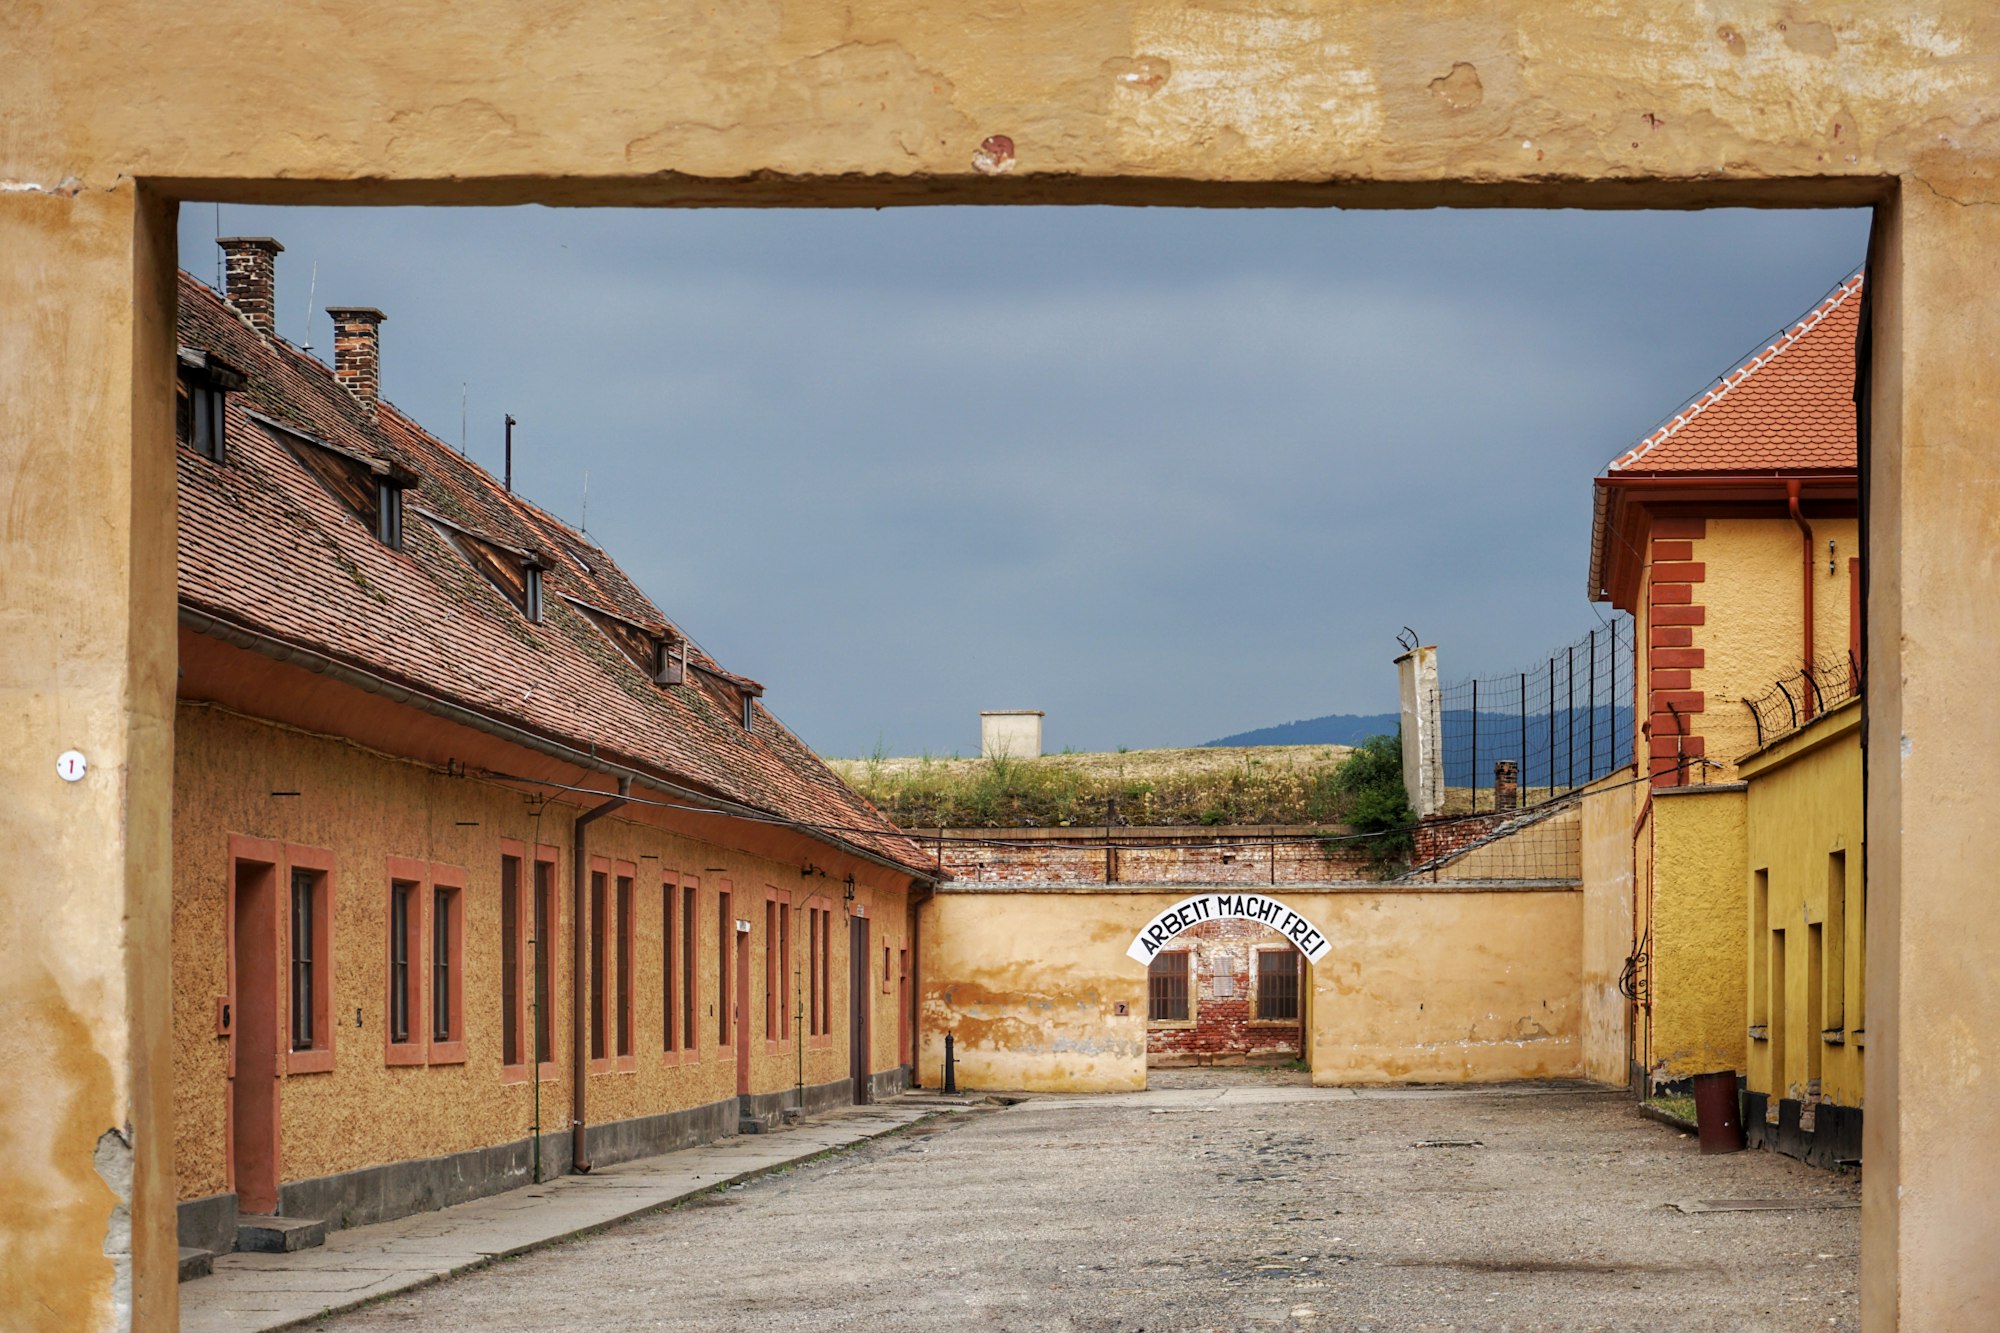 Theresienstadt. We must never forget.